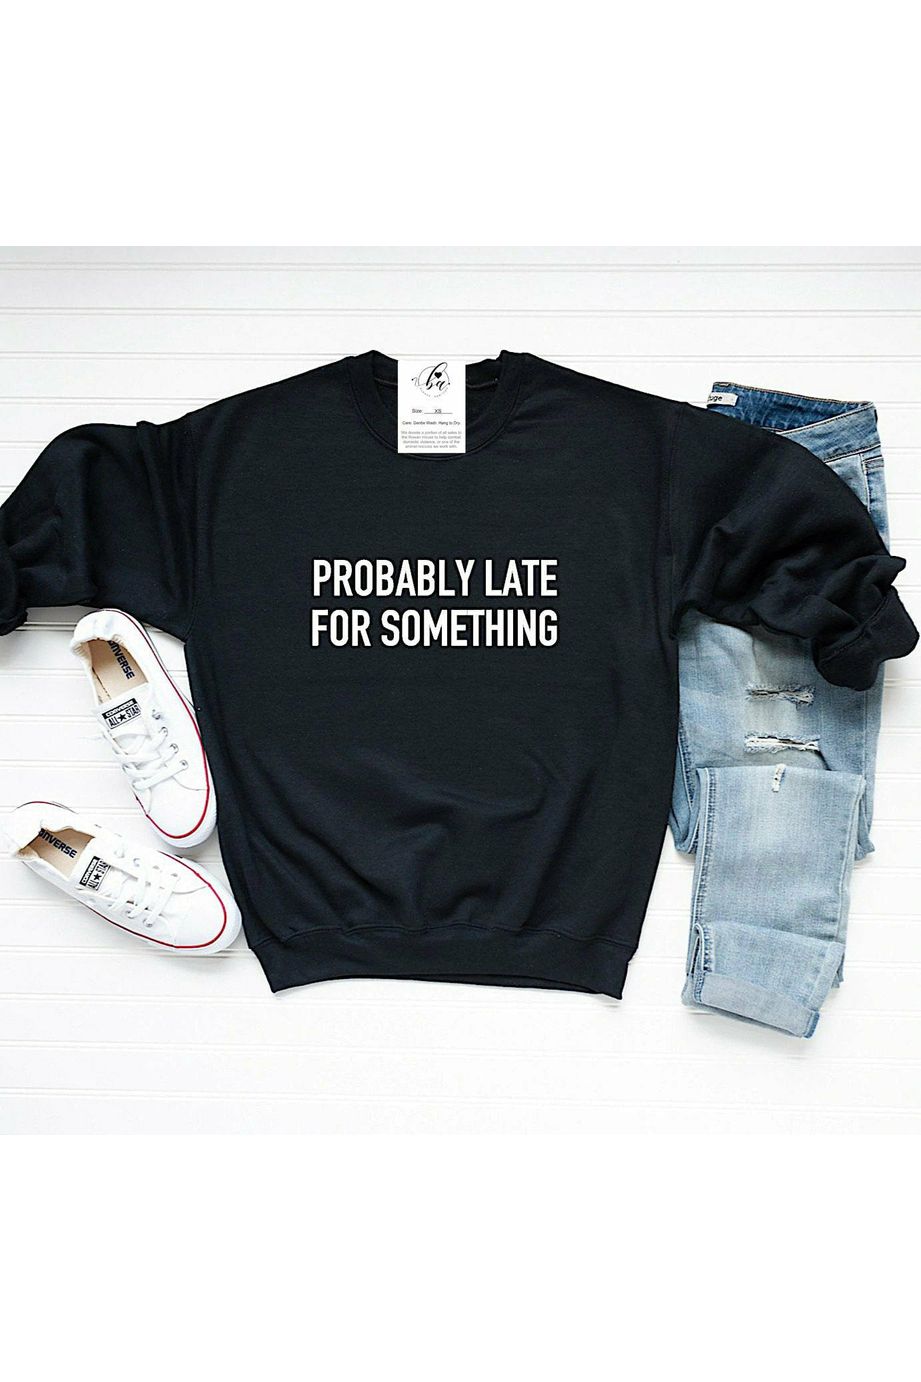 Blonde Ambition "Probably Late For Something" Sweatshirt - Style BA109